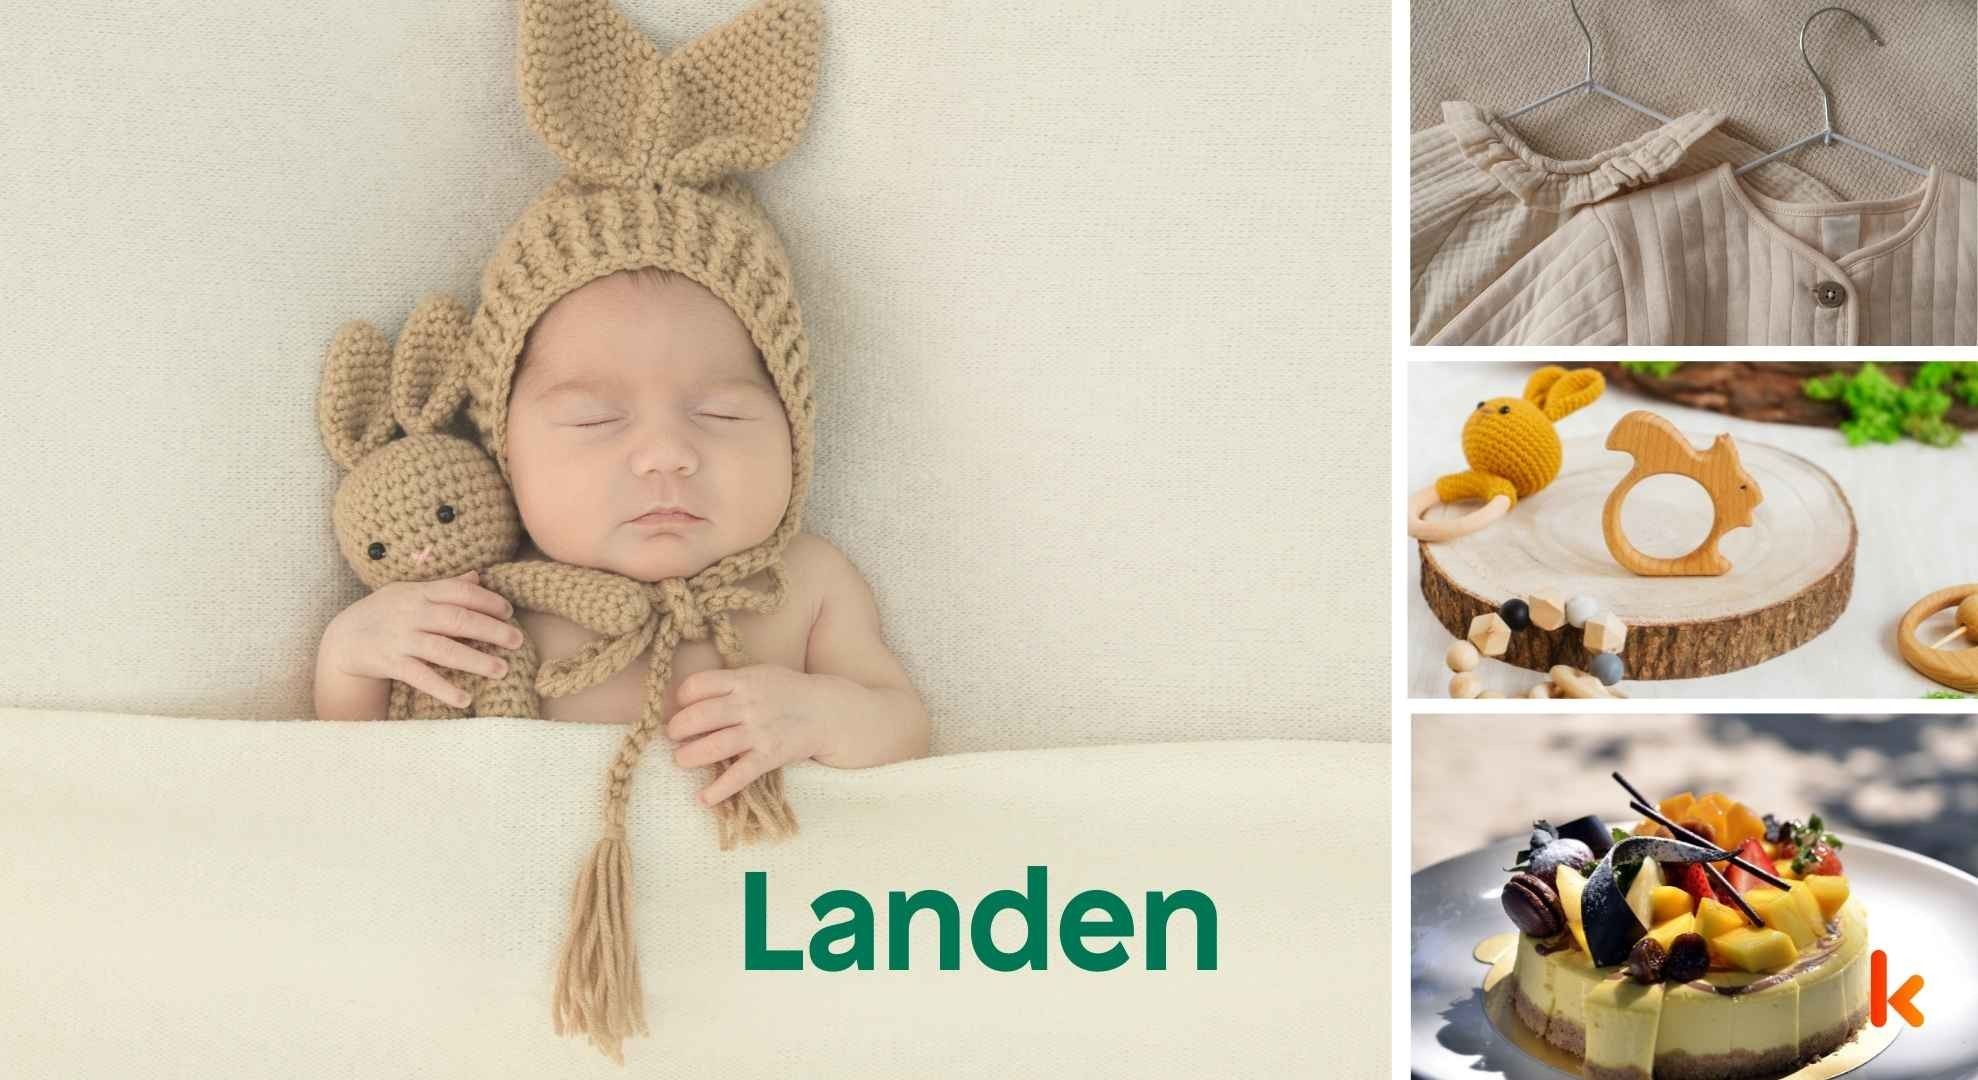 Meaning of the name Landen